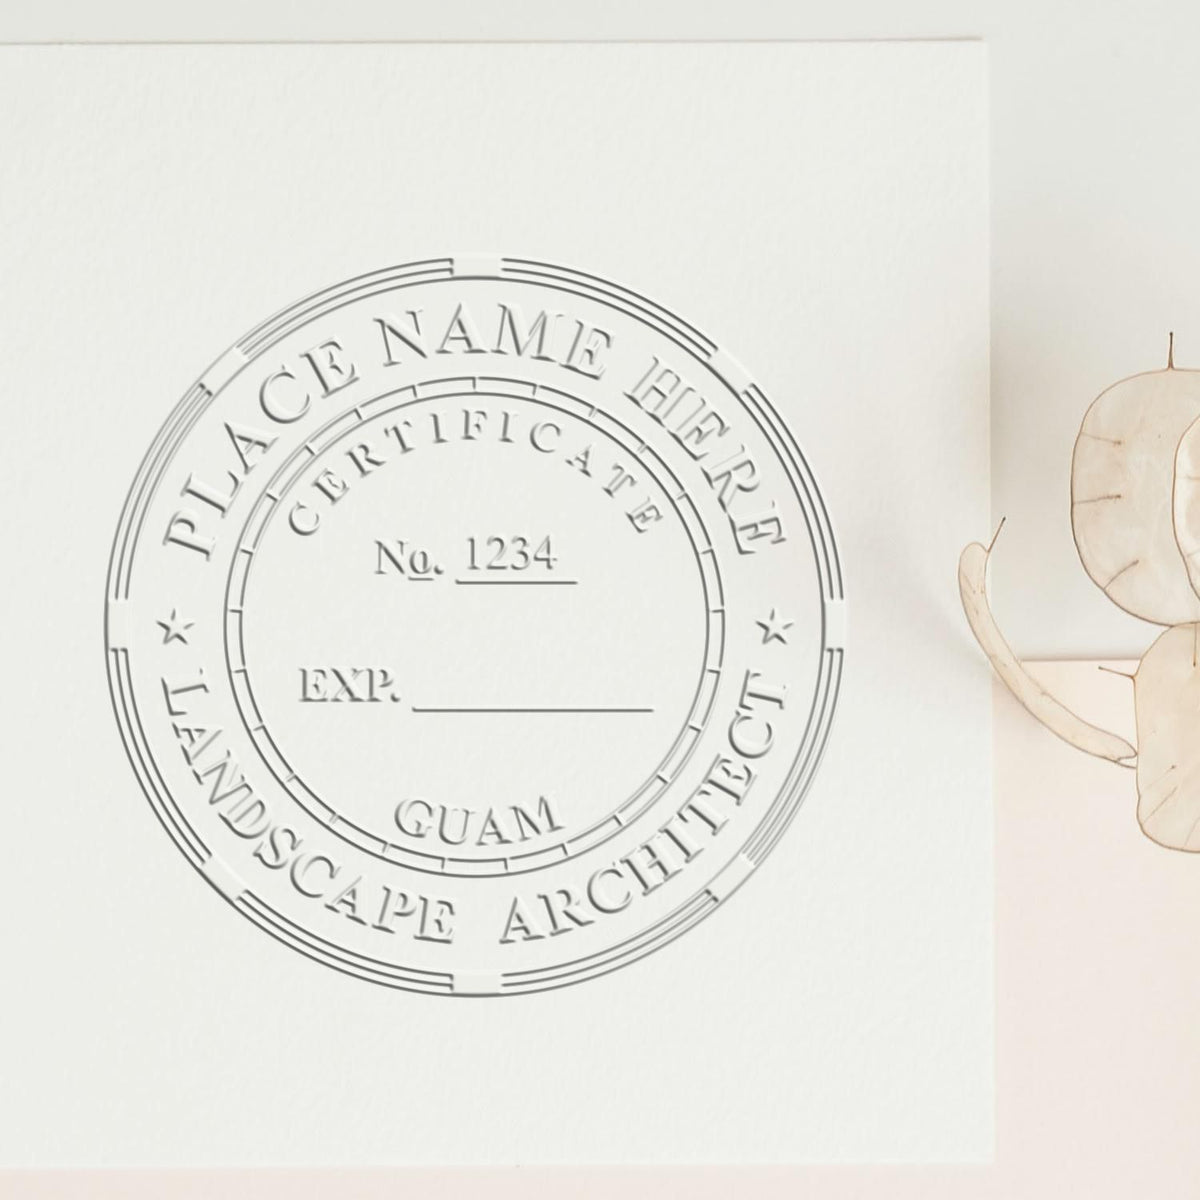 A photograph of the Hybrid Guam Landscape Architect Seal stamp impression reveals a vivid, professional image of the on paper.